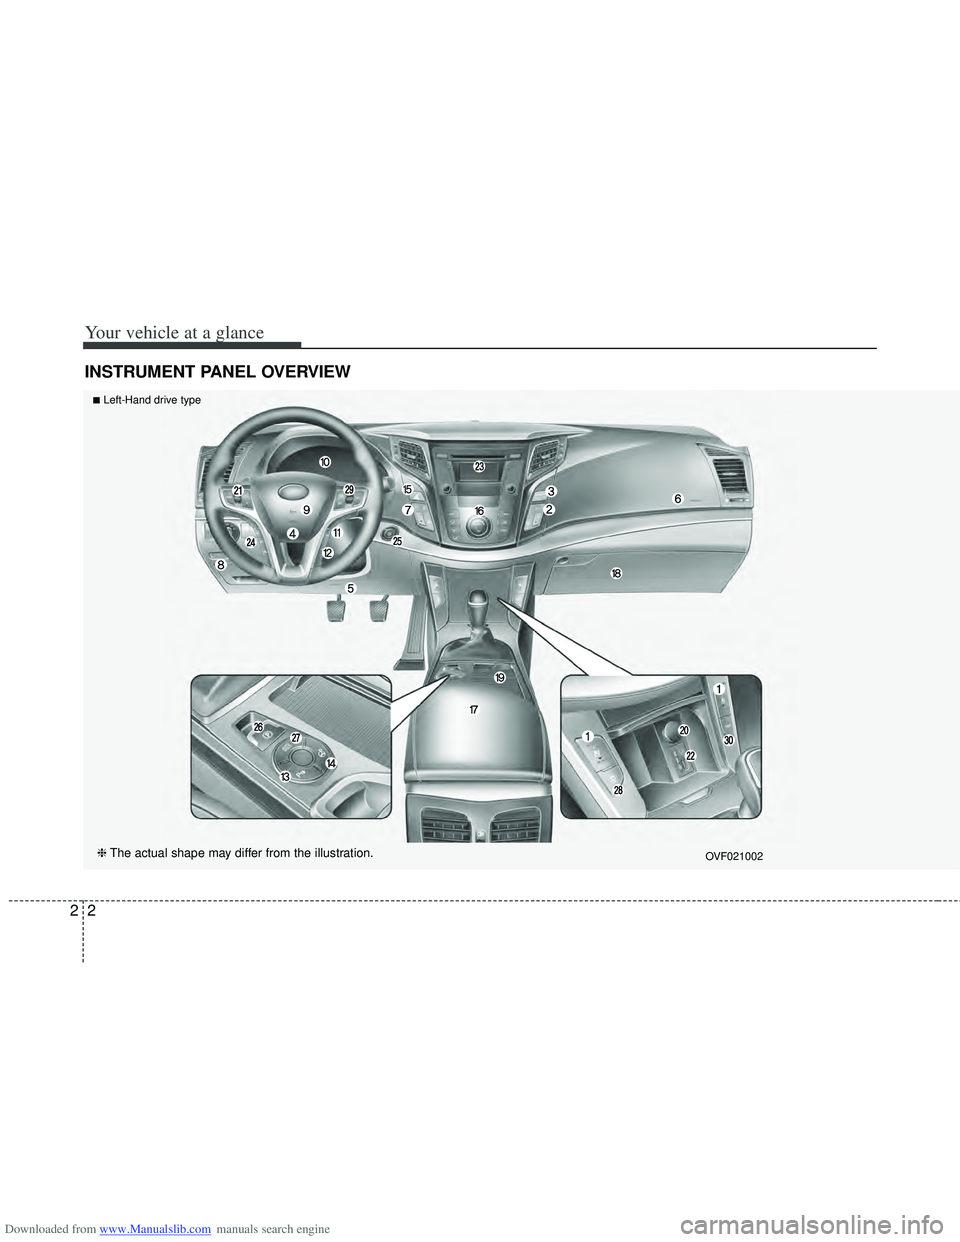 HYUNDAI I40 2018 User Guide Downloaded from www.Manualslib.com manuals search engine Your vehicle at a glance
22
INSTRUMENT PANEL OVERVIEW
■Left-Hand drive type
❈The actual shape may differ from the illustration.OVF021002  